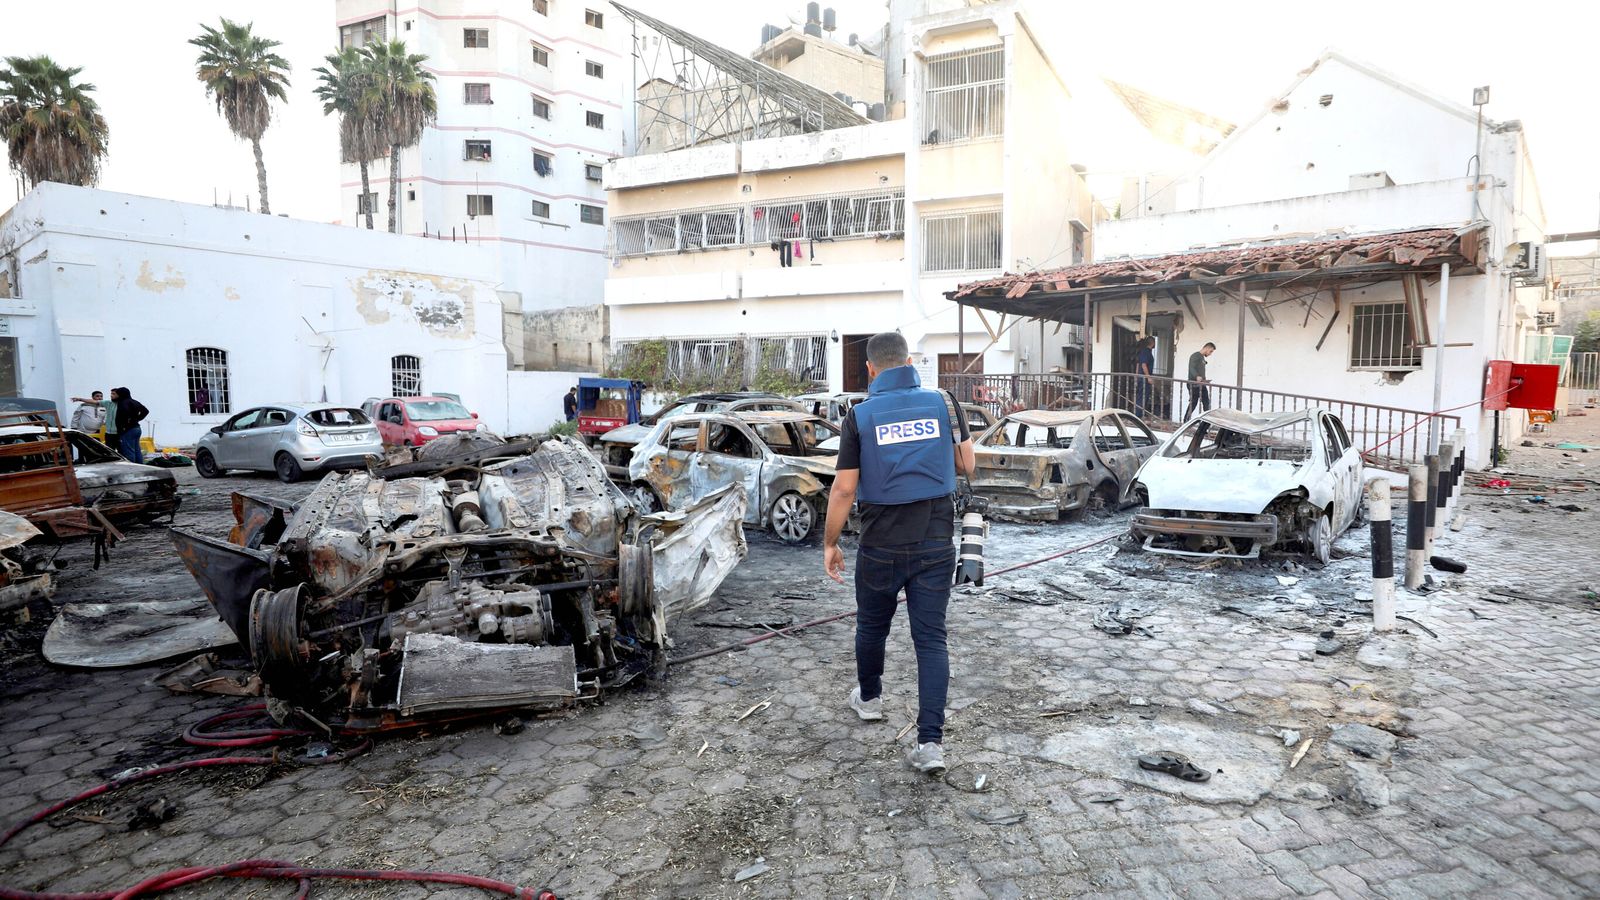 US spy agencies believe hospital blast caused by Palestinian rocket that broke apart after engine failure, officials say | World News